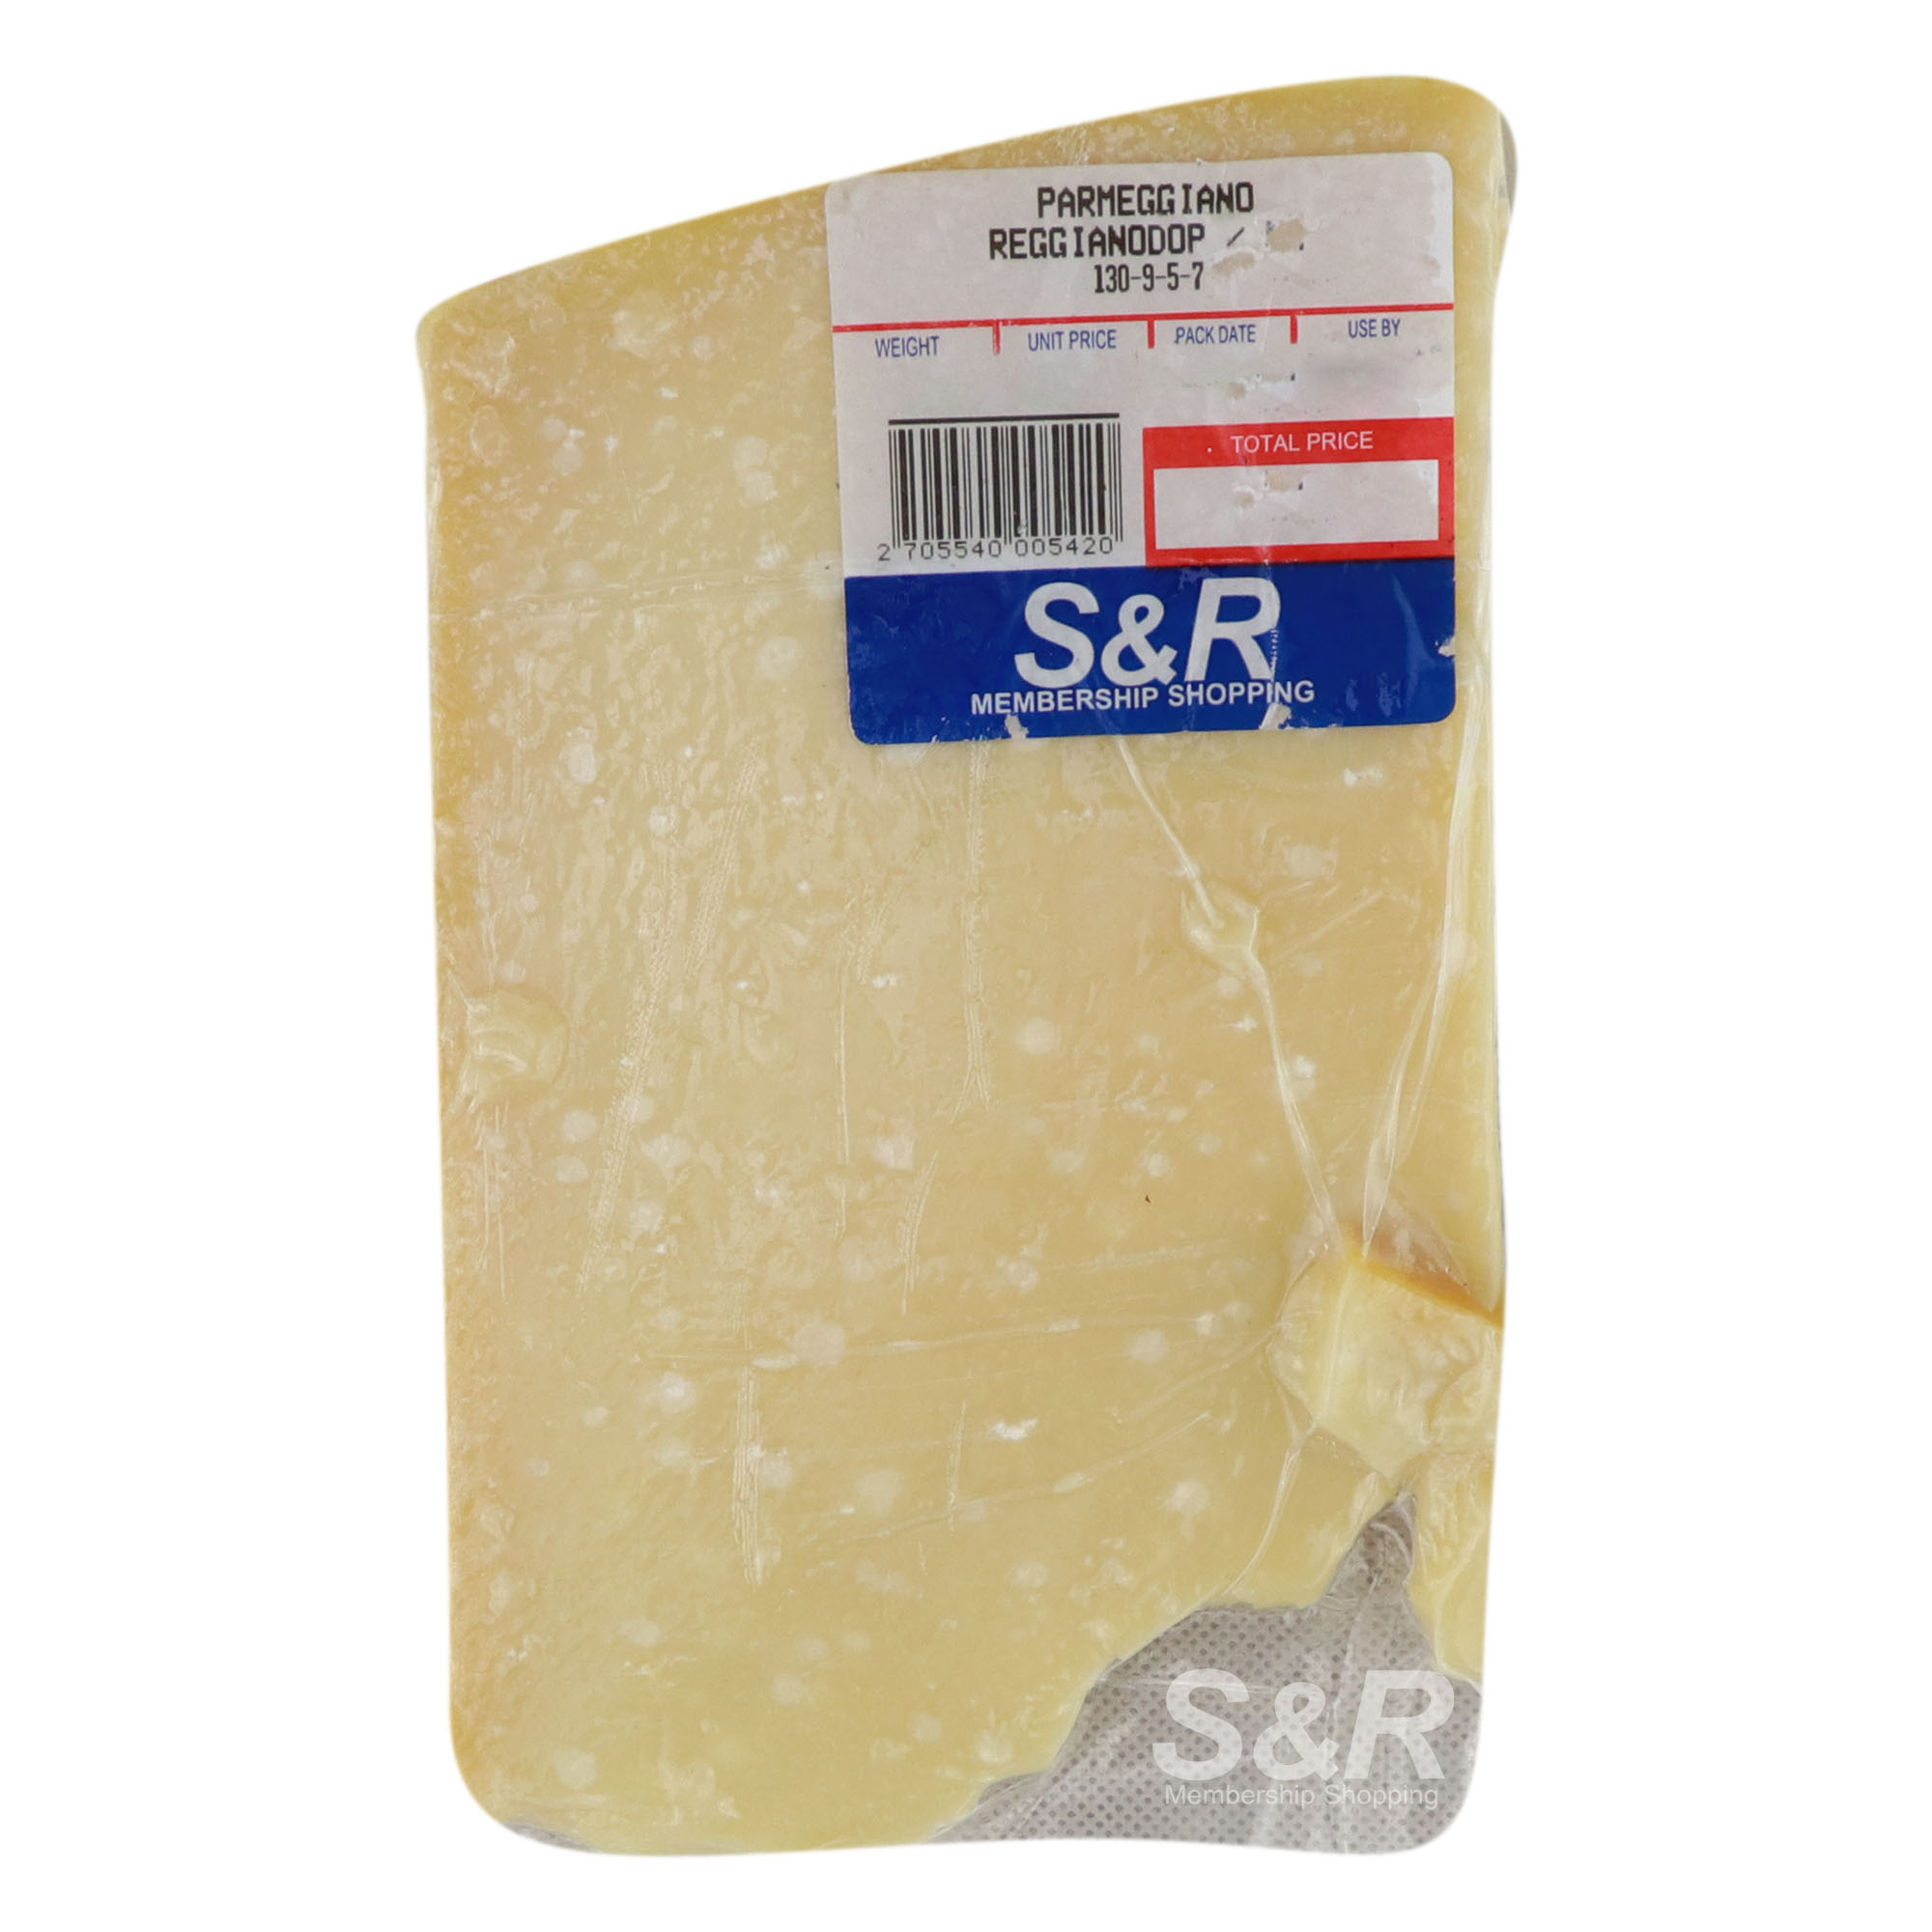 S&R Parmiggiano Reggiano DOP Cheese approx. 600g